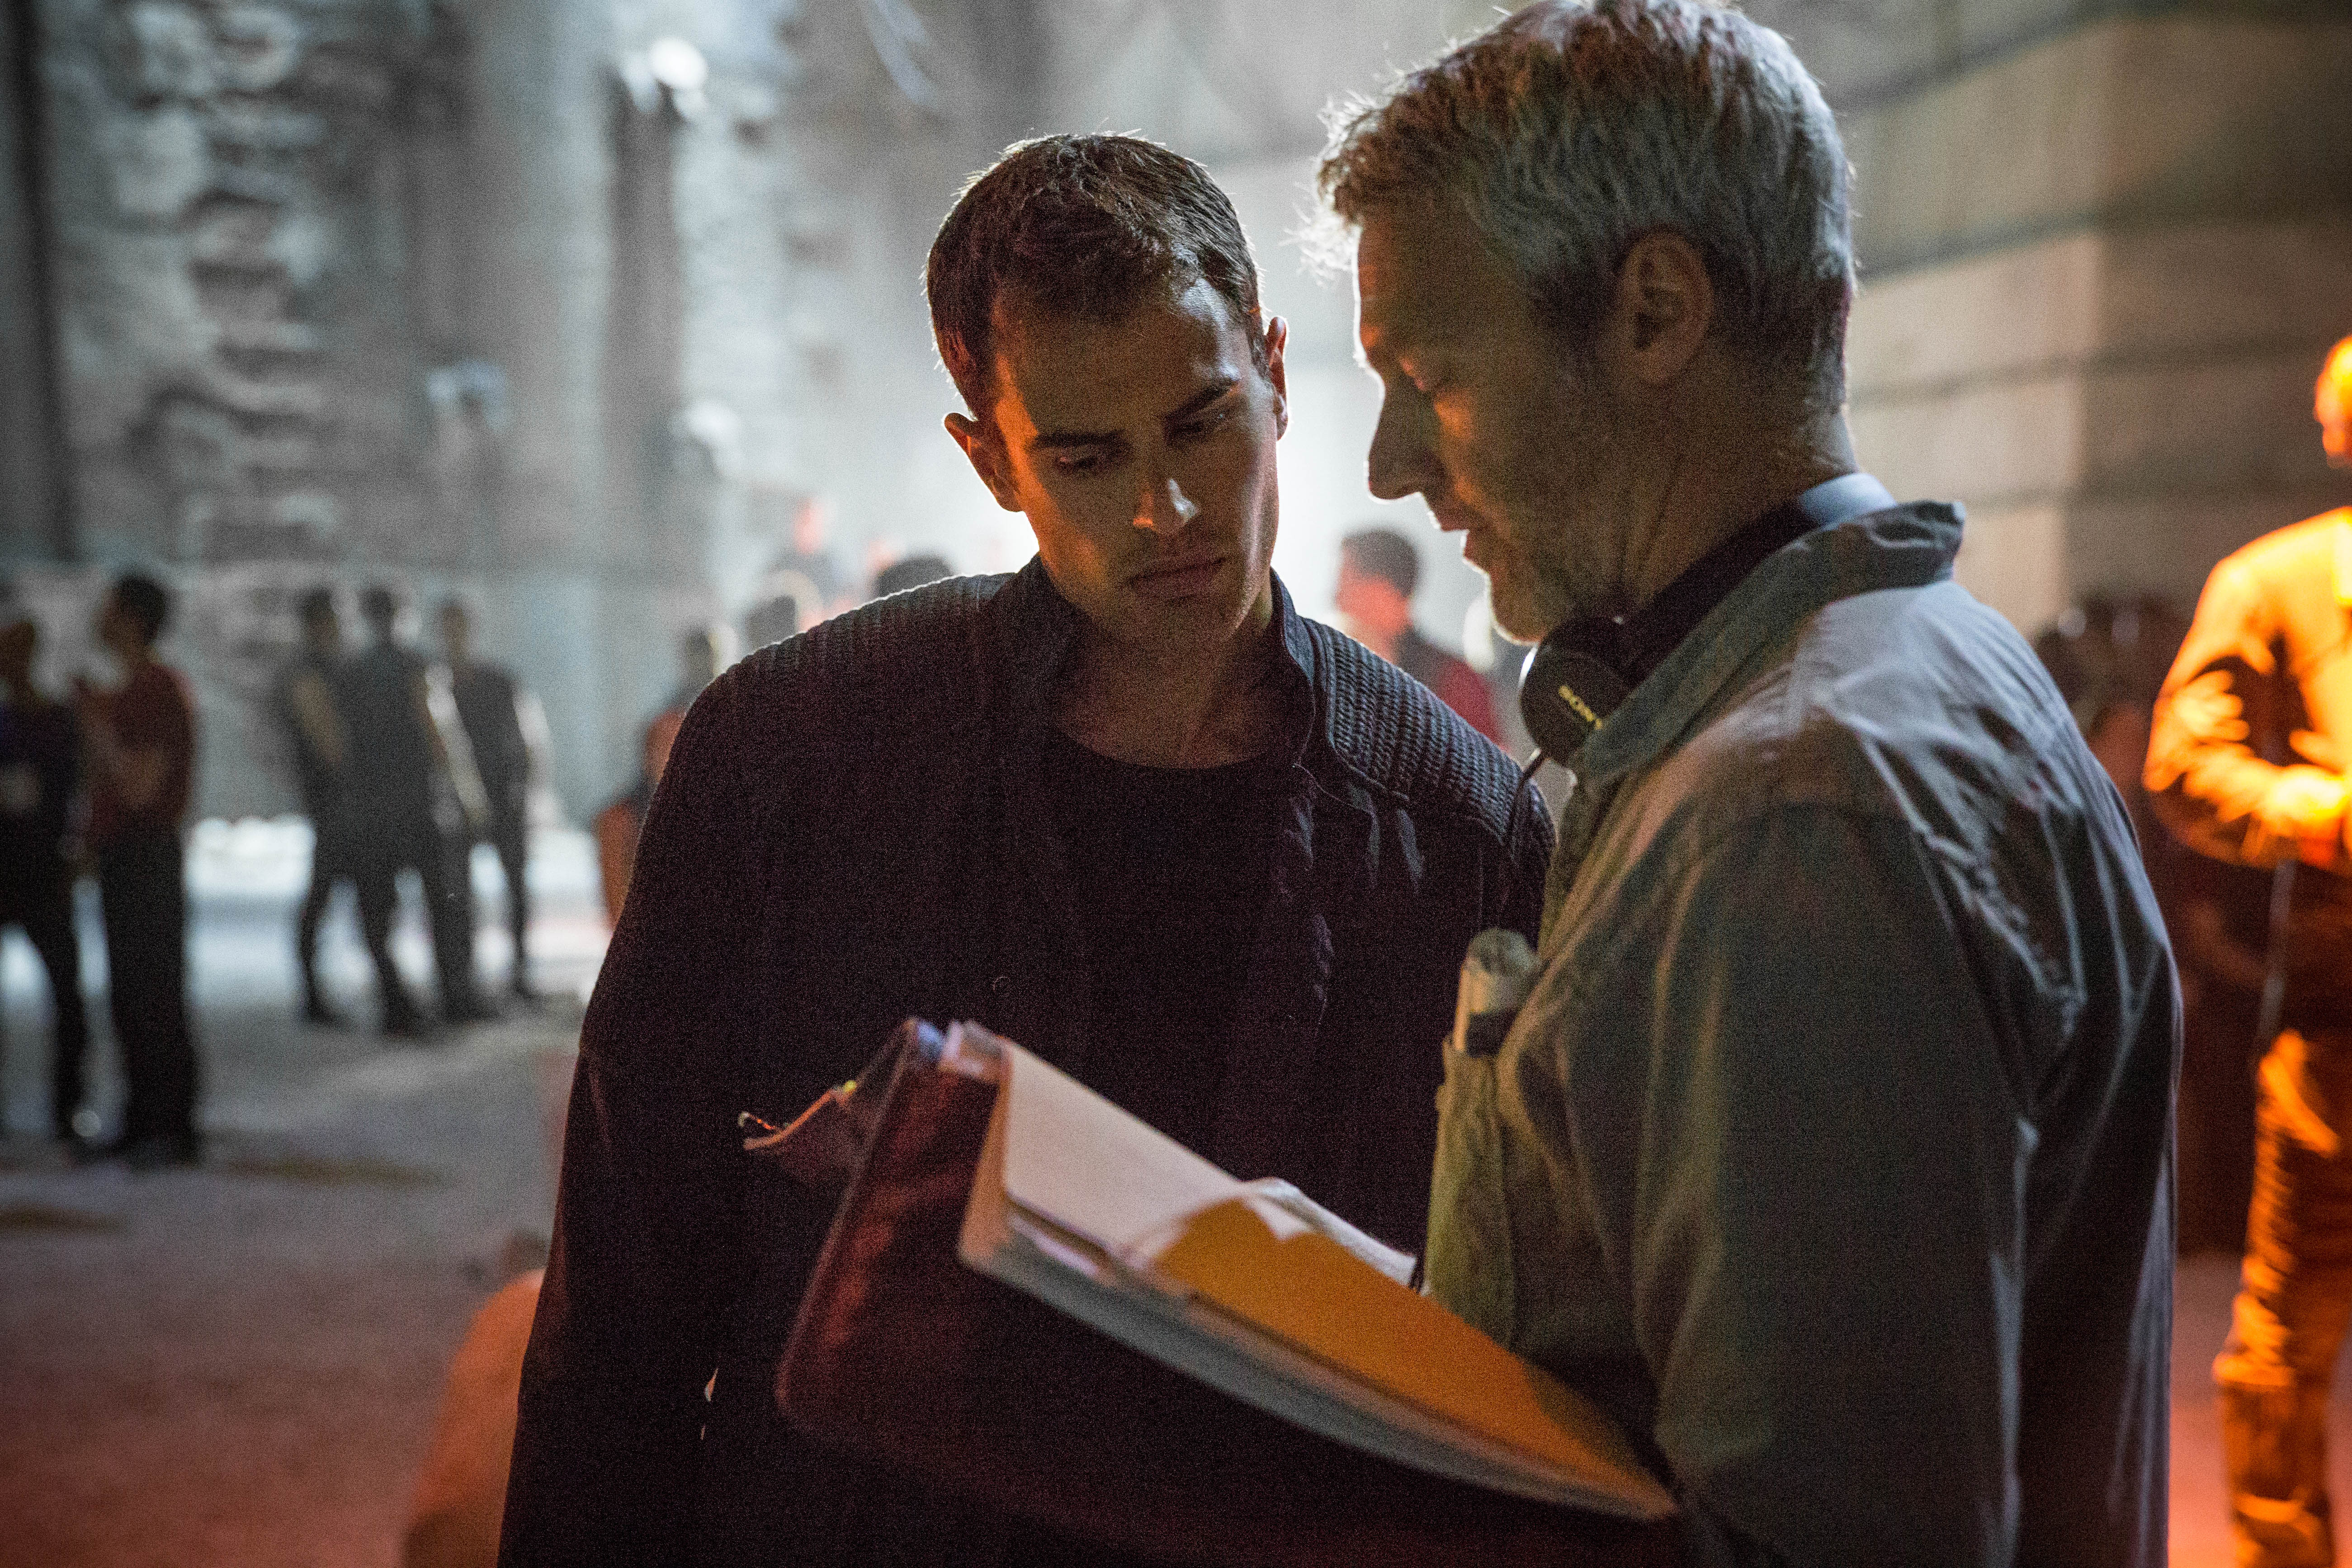 Neil Burger and Theo James in Divergente (2014)